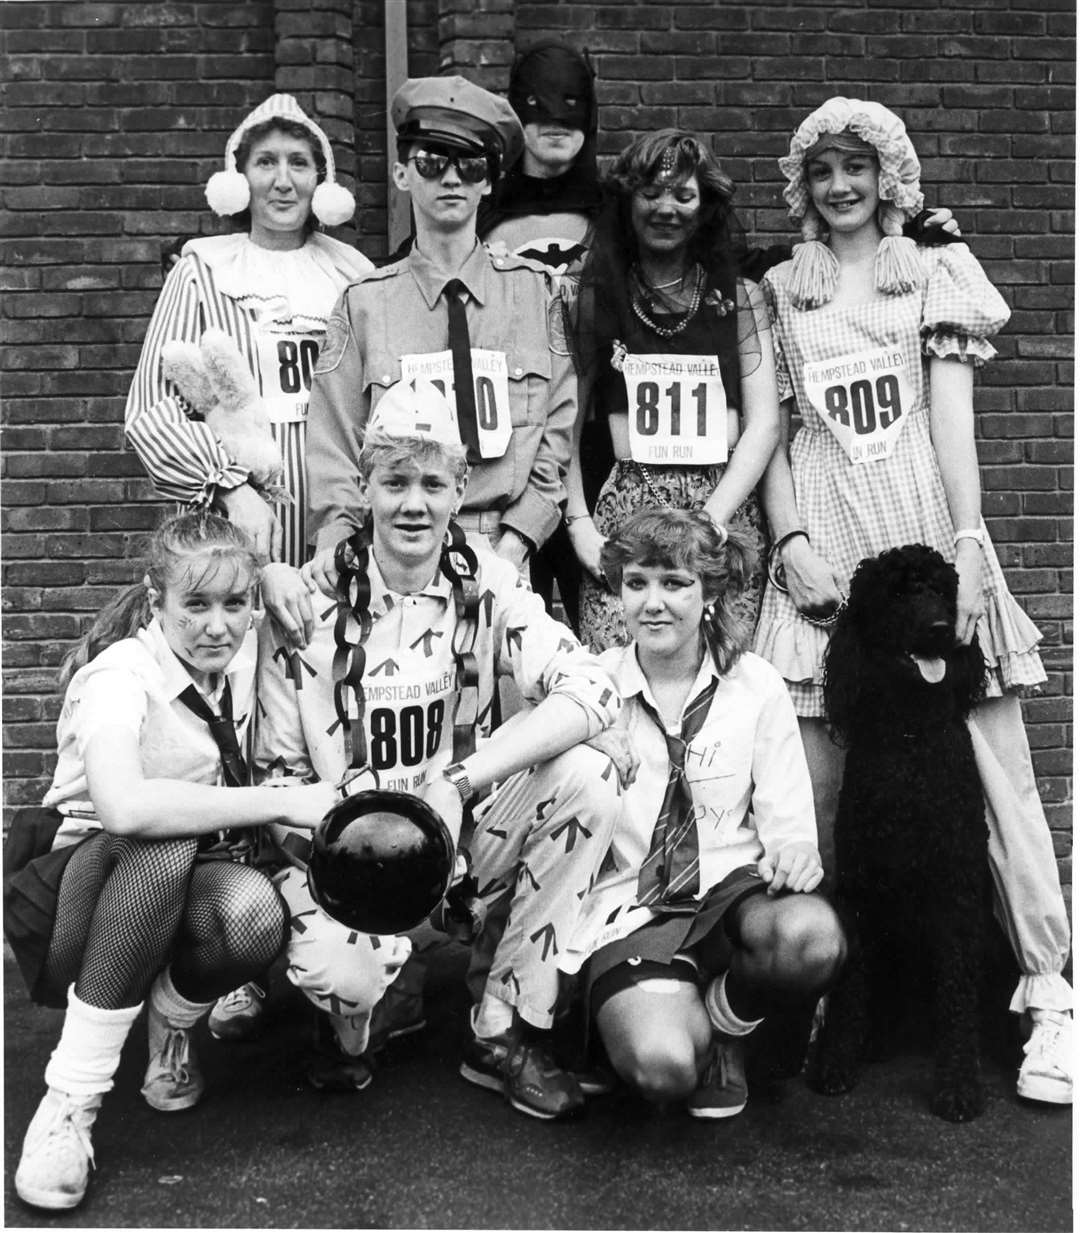 Dressed up for the Hempstead Valley Fun Run in May 1988.